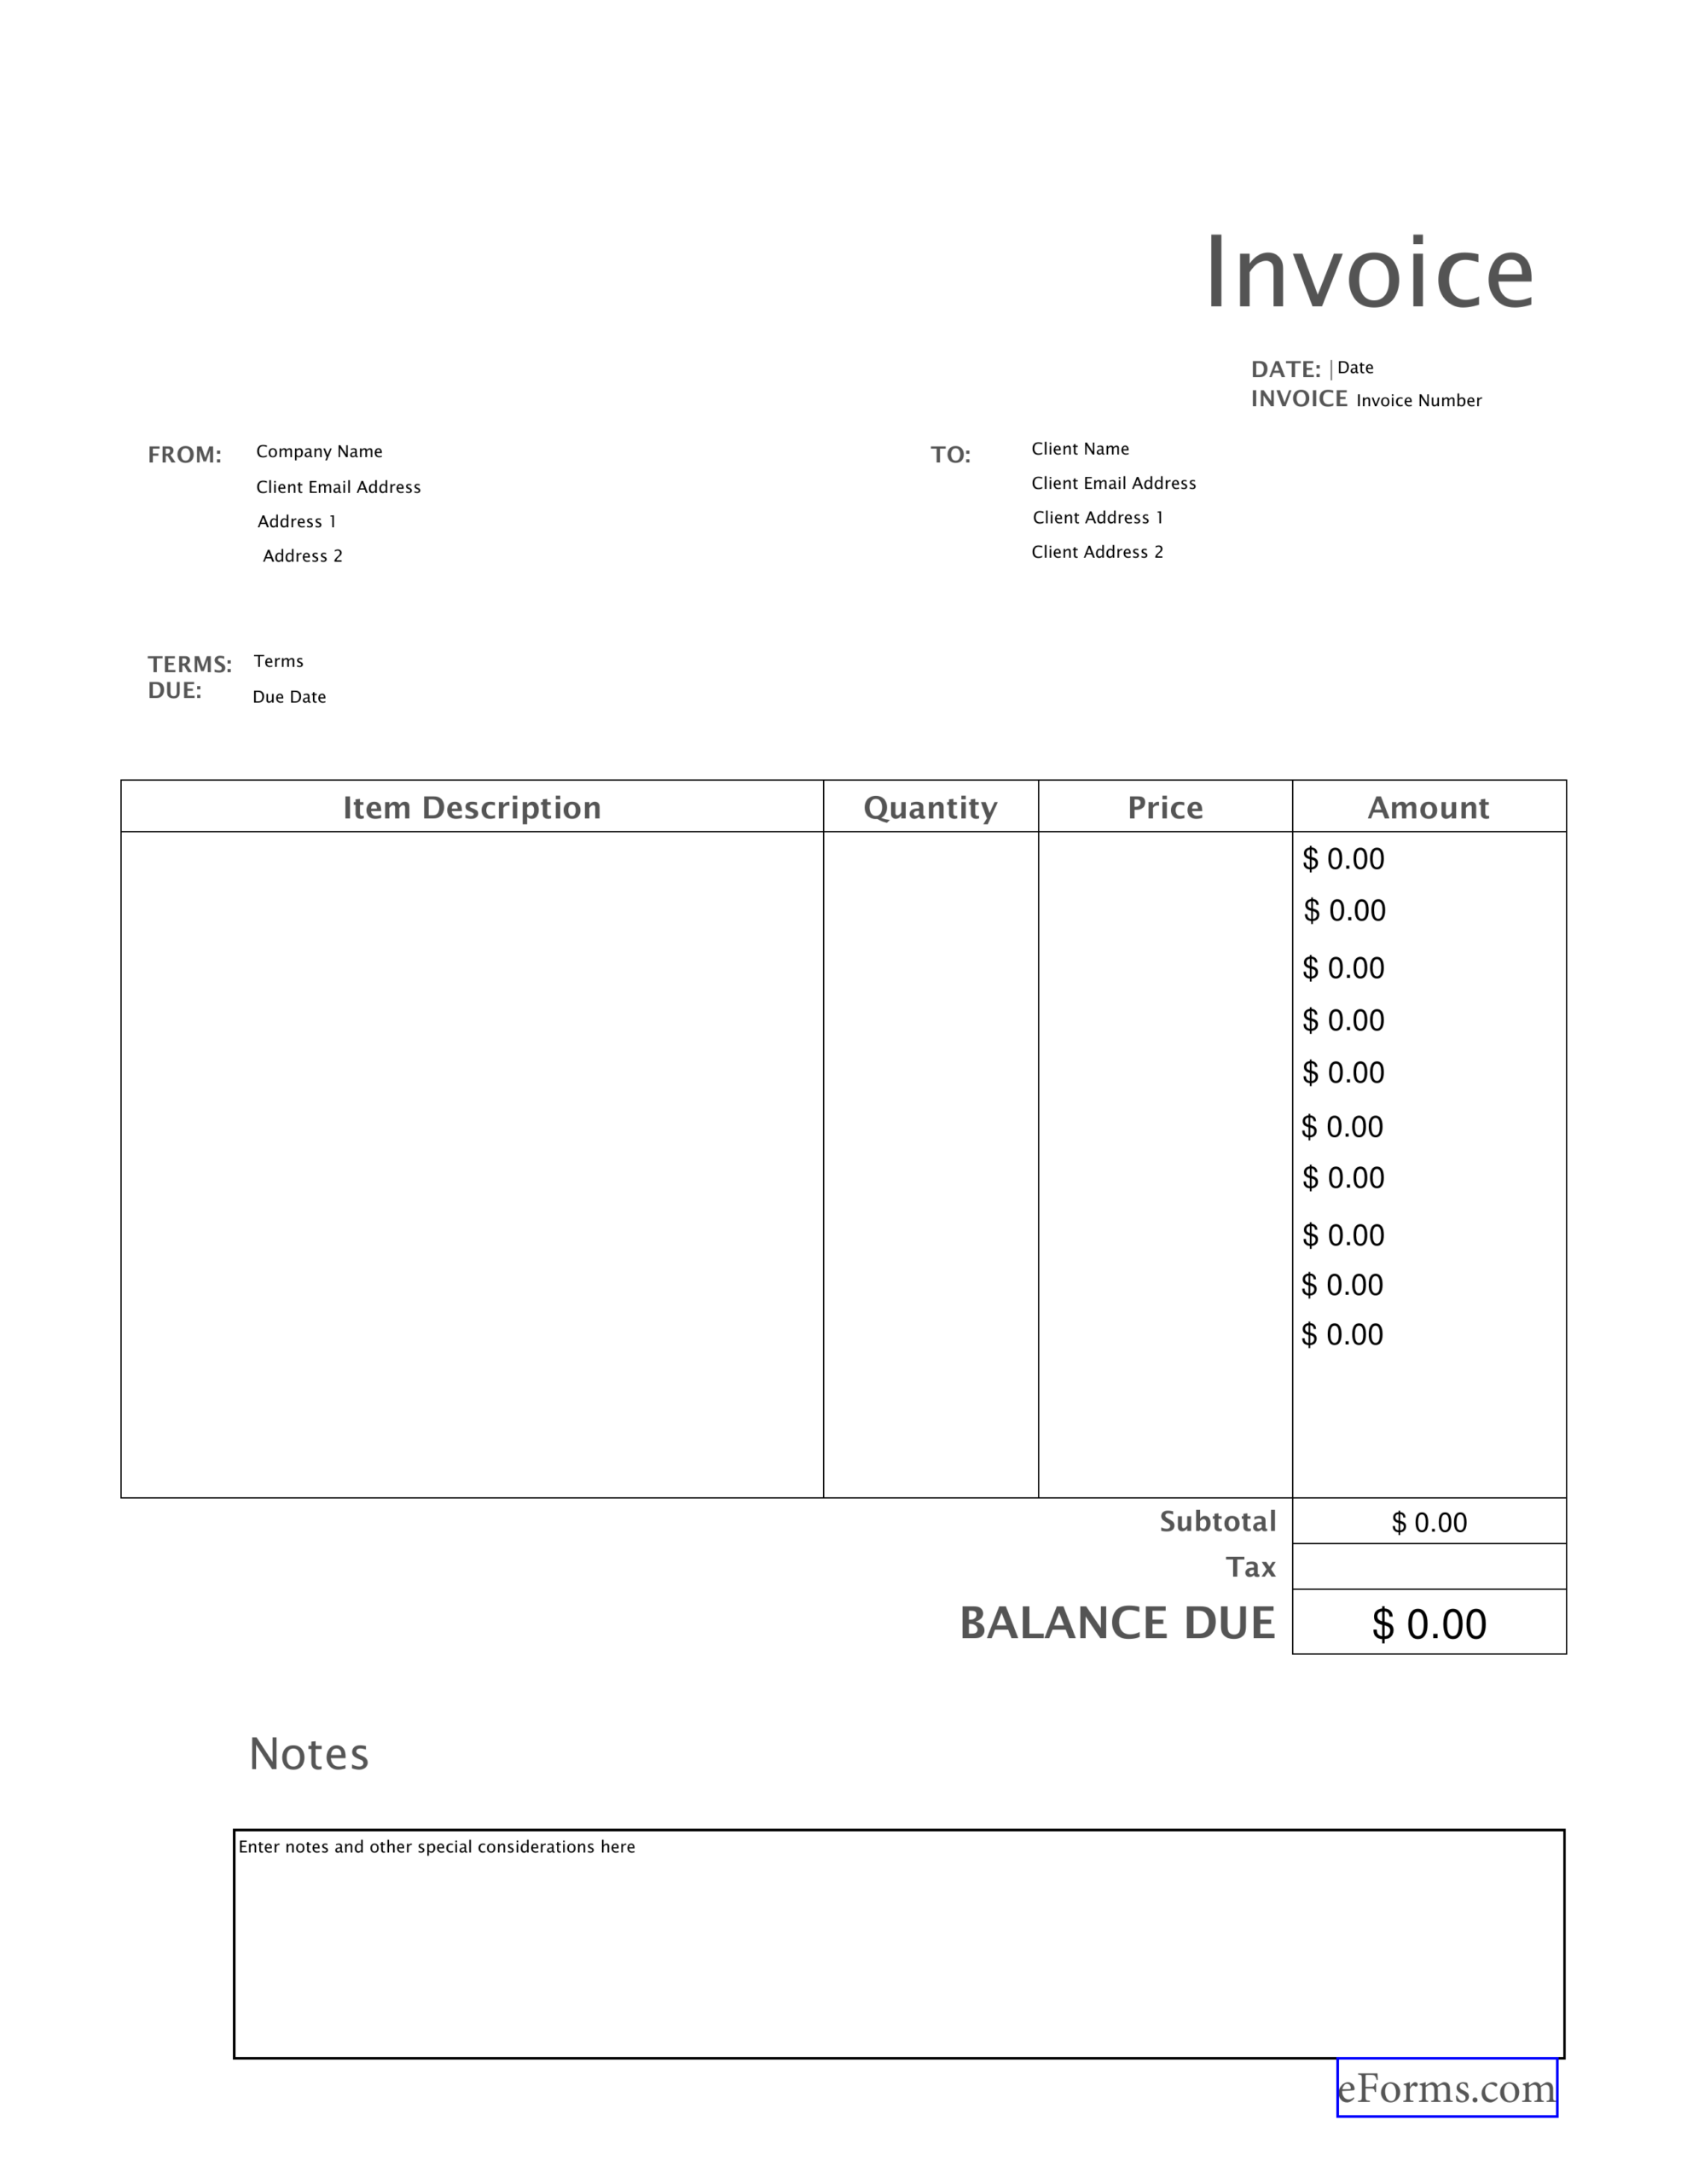 Free Blank Invoice Templates – Pdf | Eforms – Free Fillable Within Invoice Template Filetype Doc